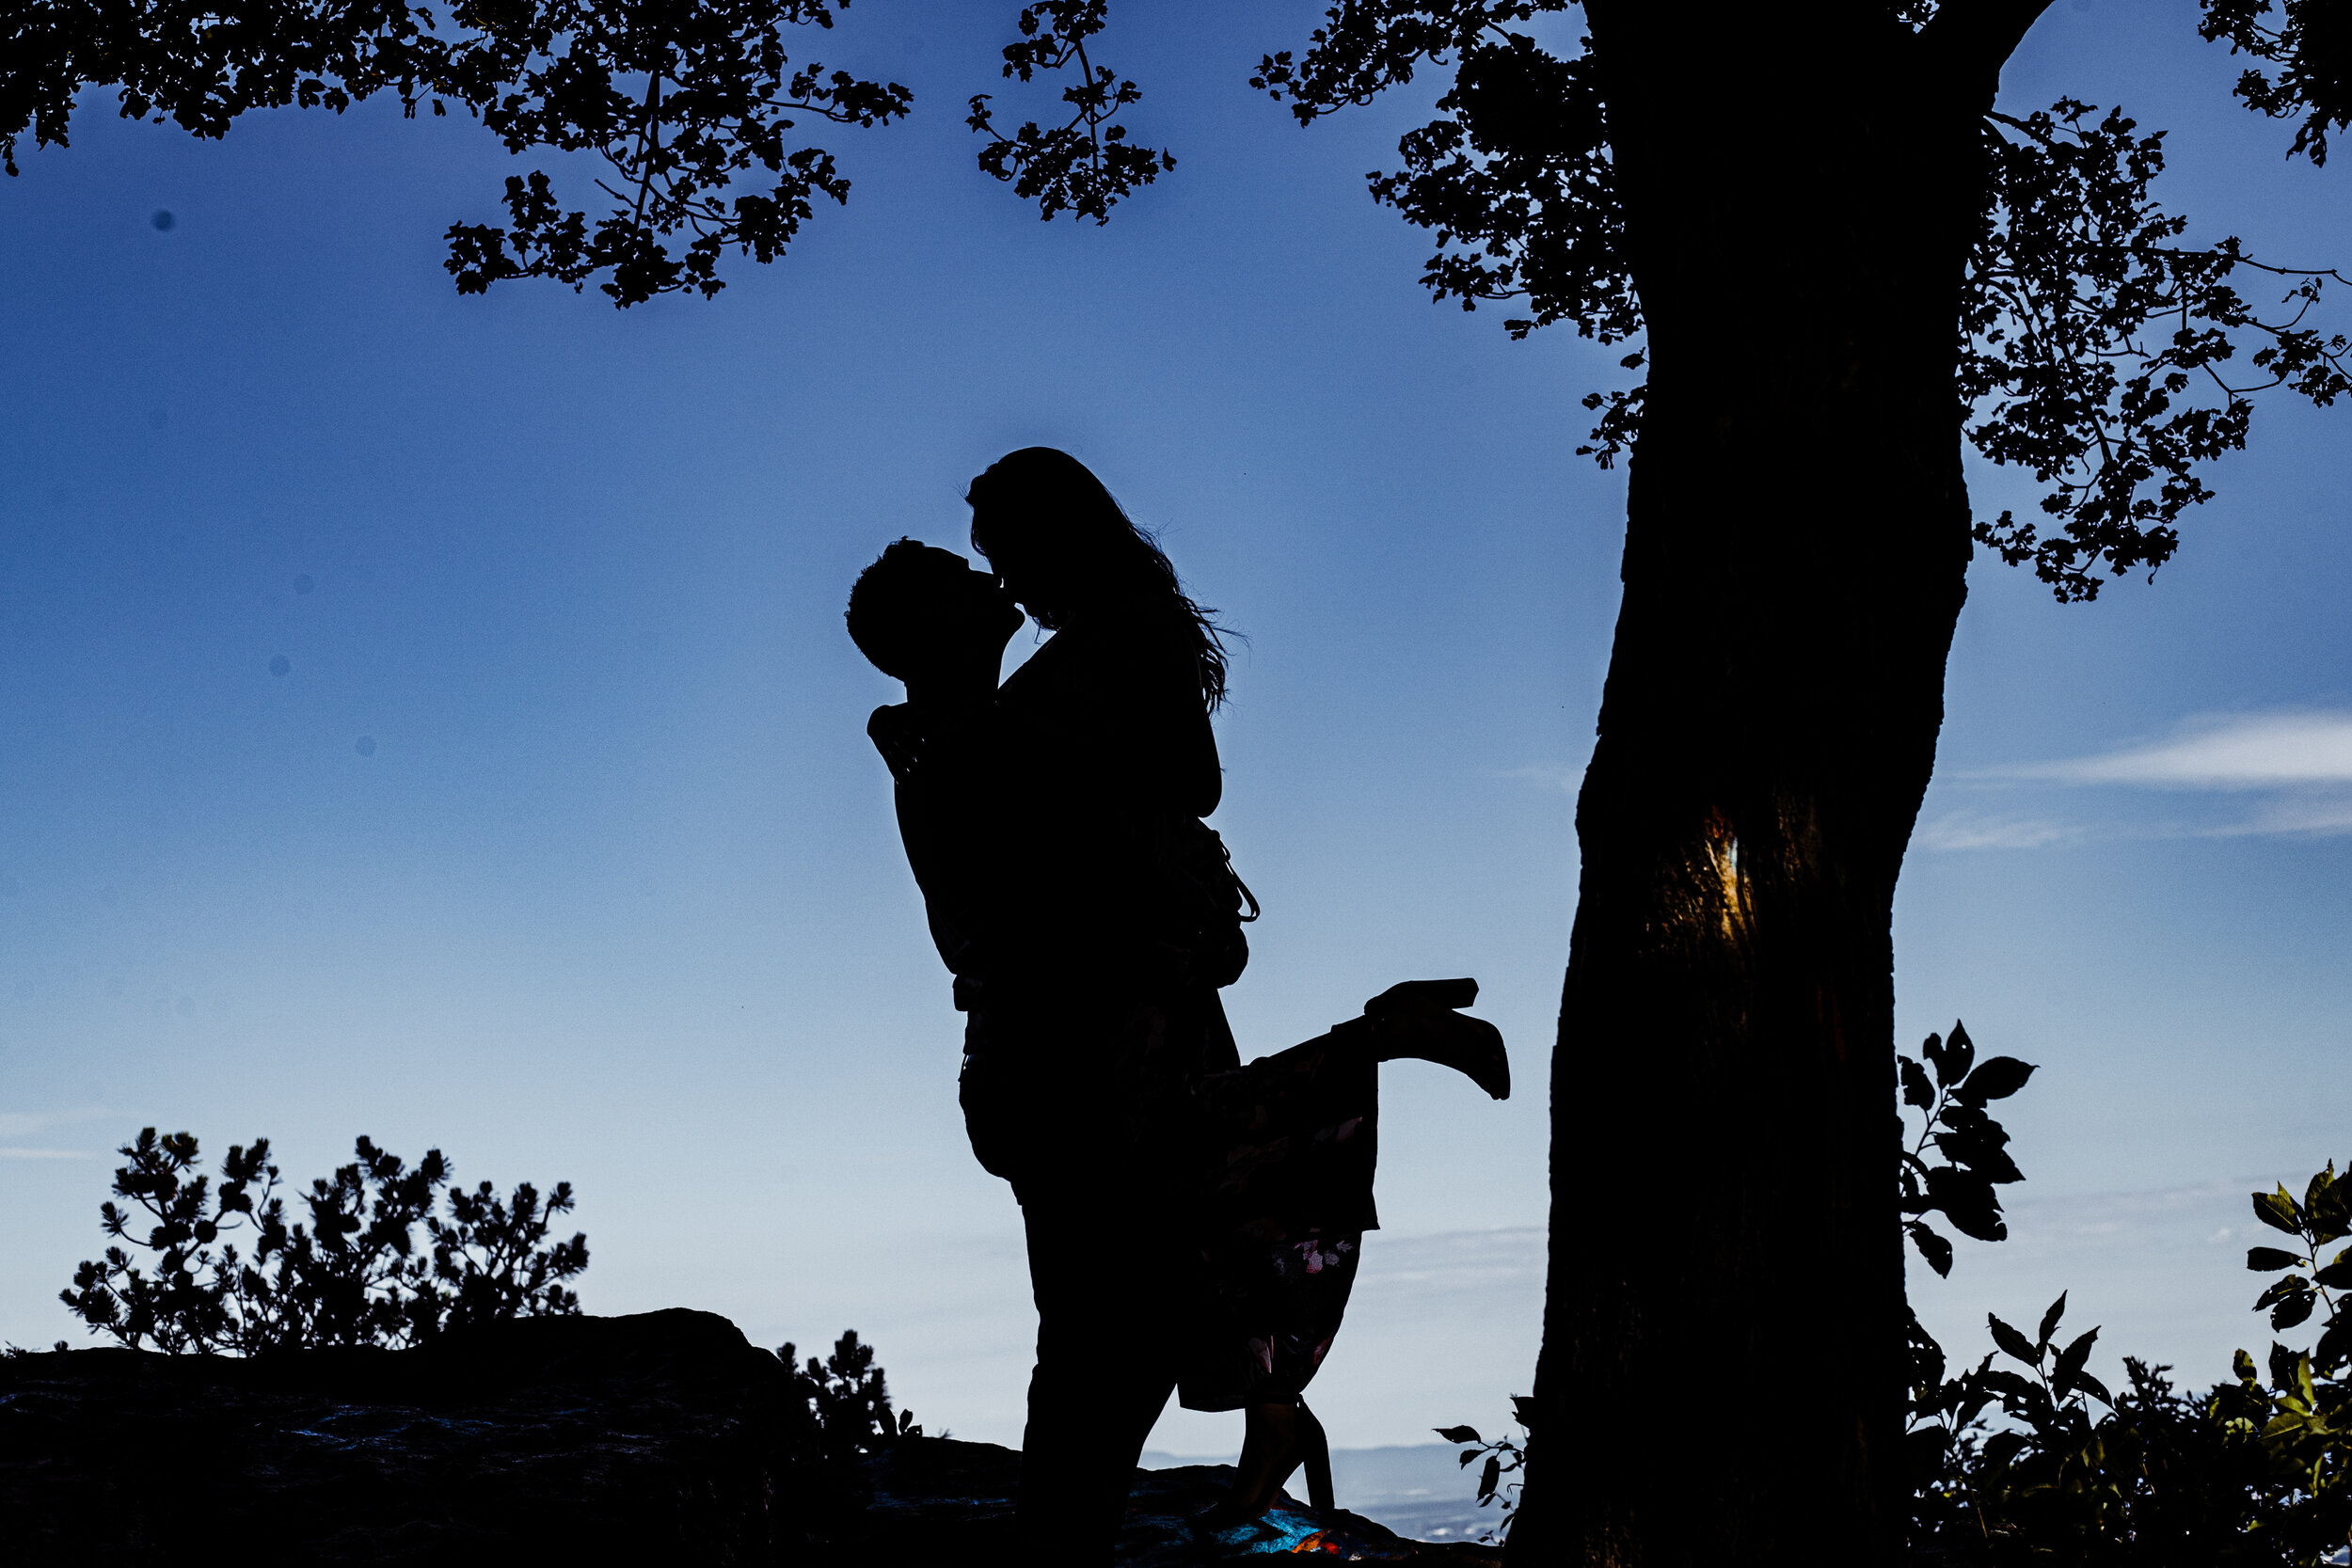 Engagement Session at High Rock Mountain in Western Maryland by Megapixels Media Photography best husband and wife wedding photographers-34.jpg